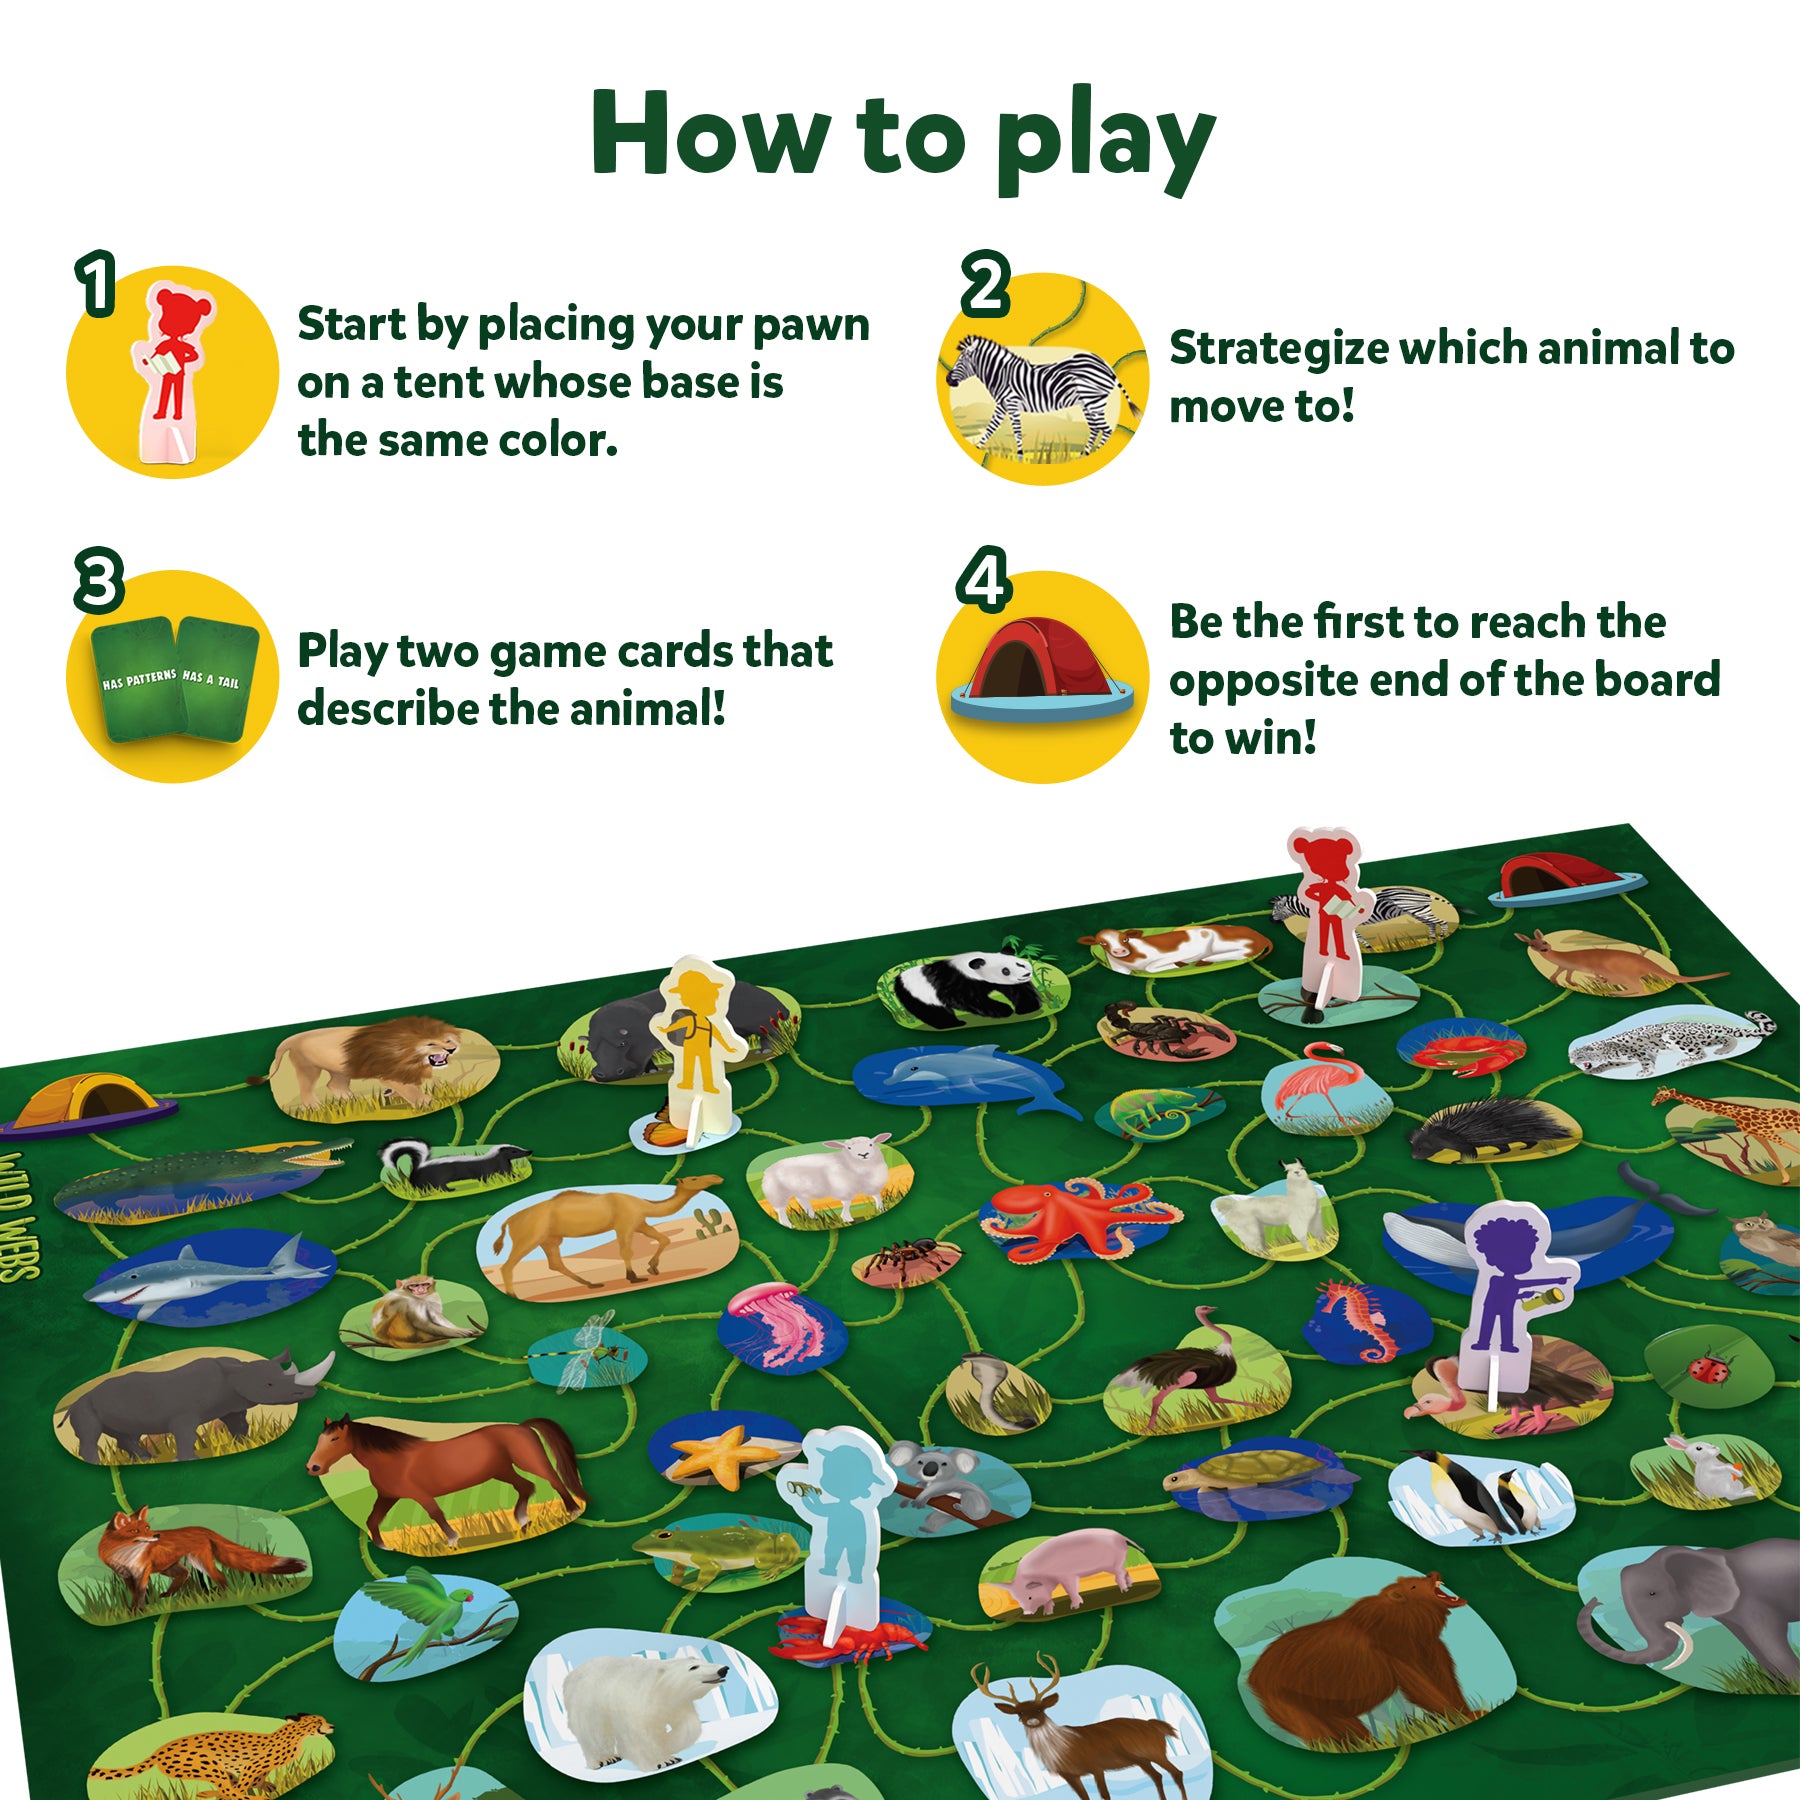 Skillmatics Board Game - Wild Webs, Animal Learning Game, Gifts, Family Friendly Games for Ages 6 and Up